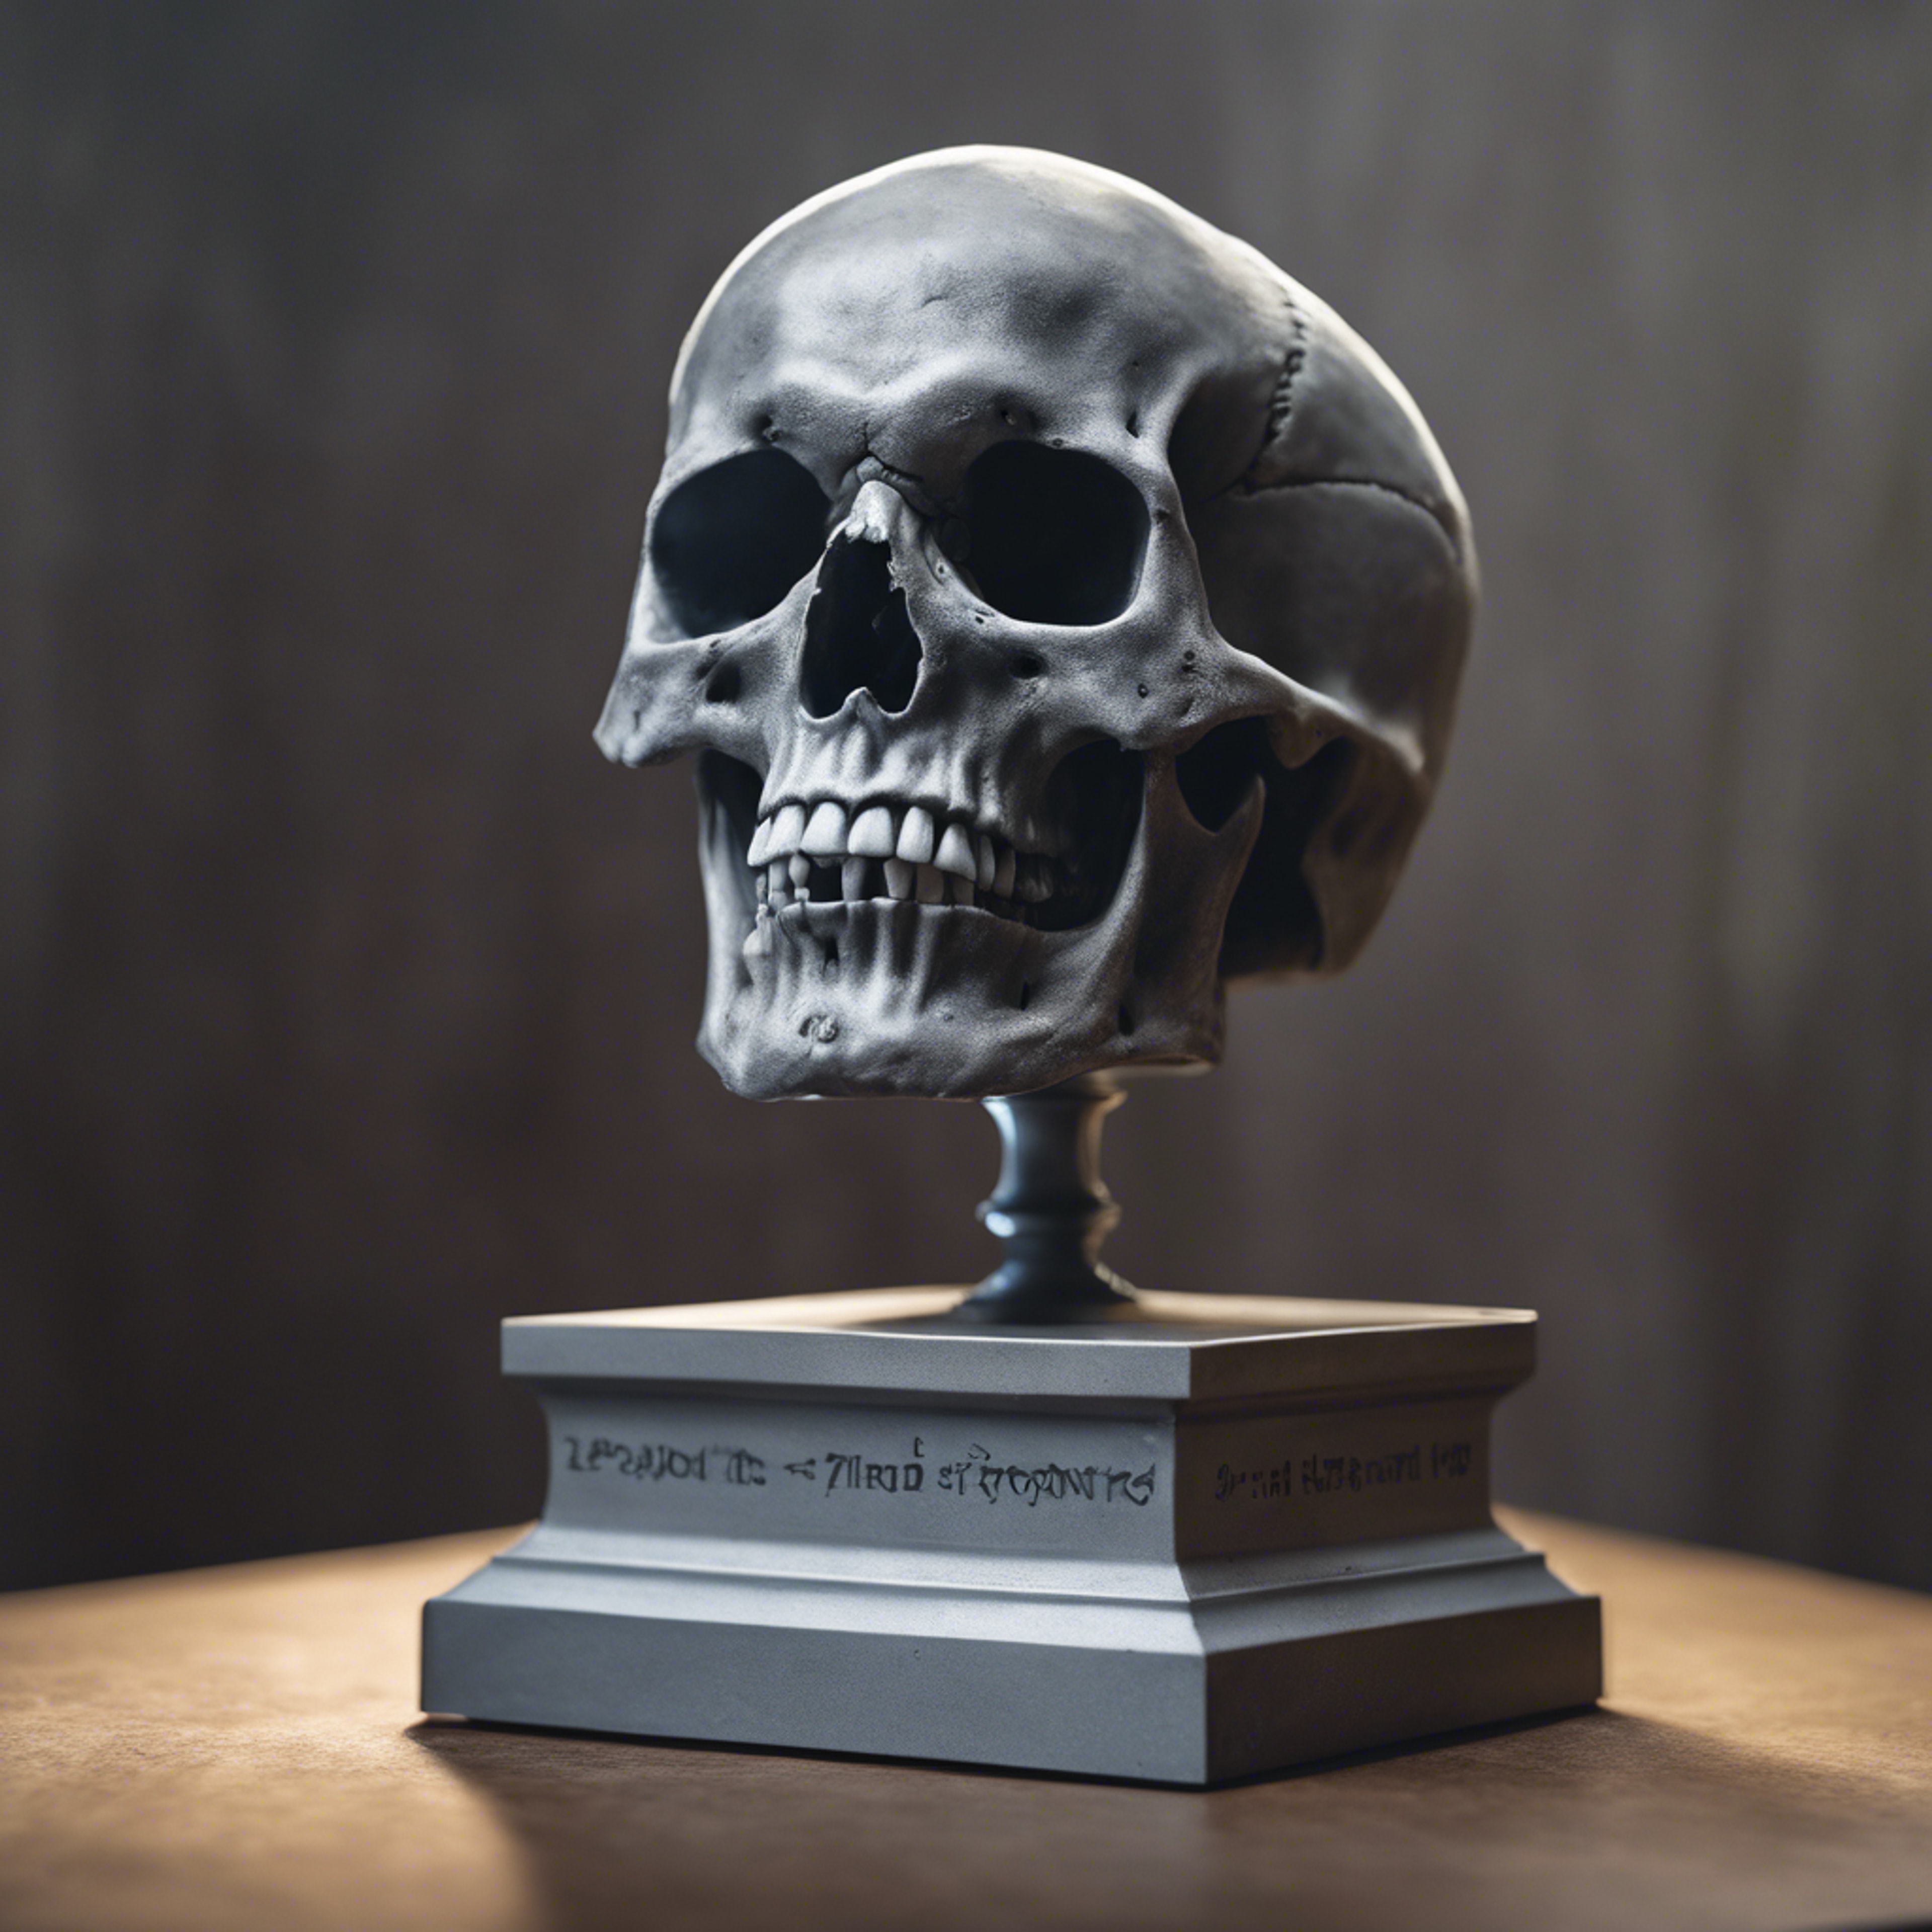 A spot-lit gray skull on a pedestal, starring in a classic horror movie scene. Tapet[96b08be545414606ae5a]